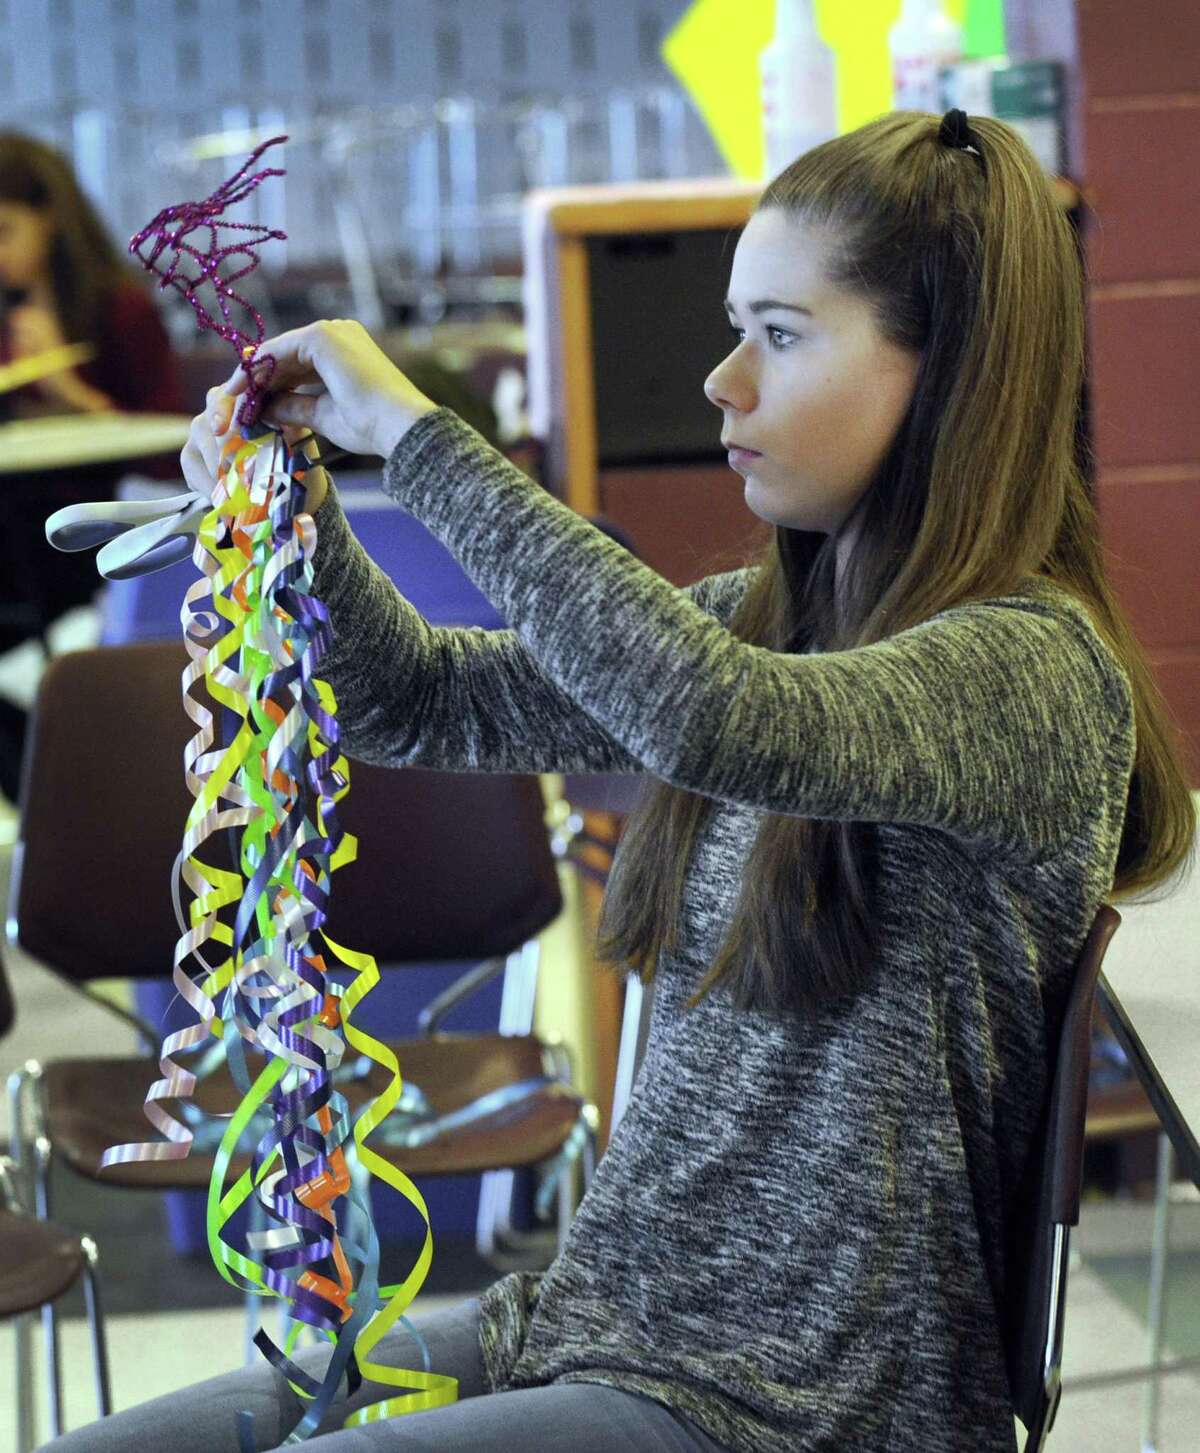 Mia Gajda, 14, curls ribbon for the crowns she is creating for the annual Scotty Fund picnic. Wednesday, April 5, 2017, Freshmen at Bethel High School worked on various volunteer projects.